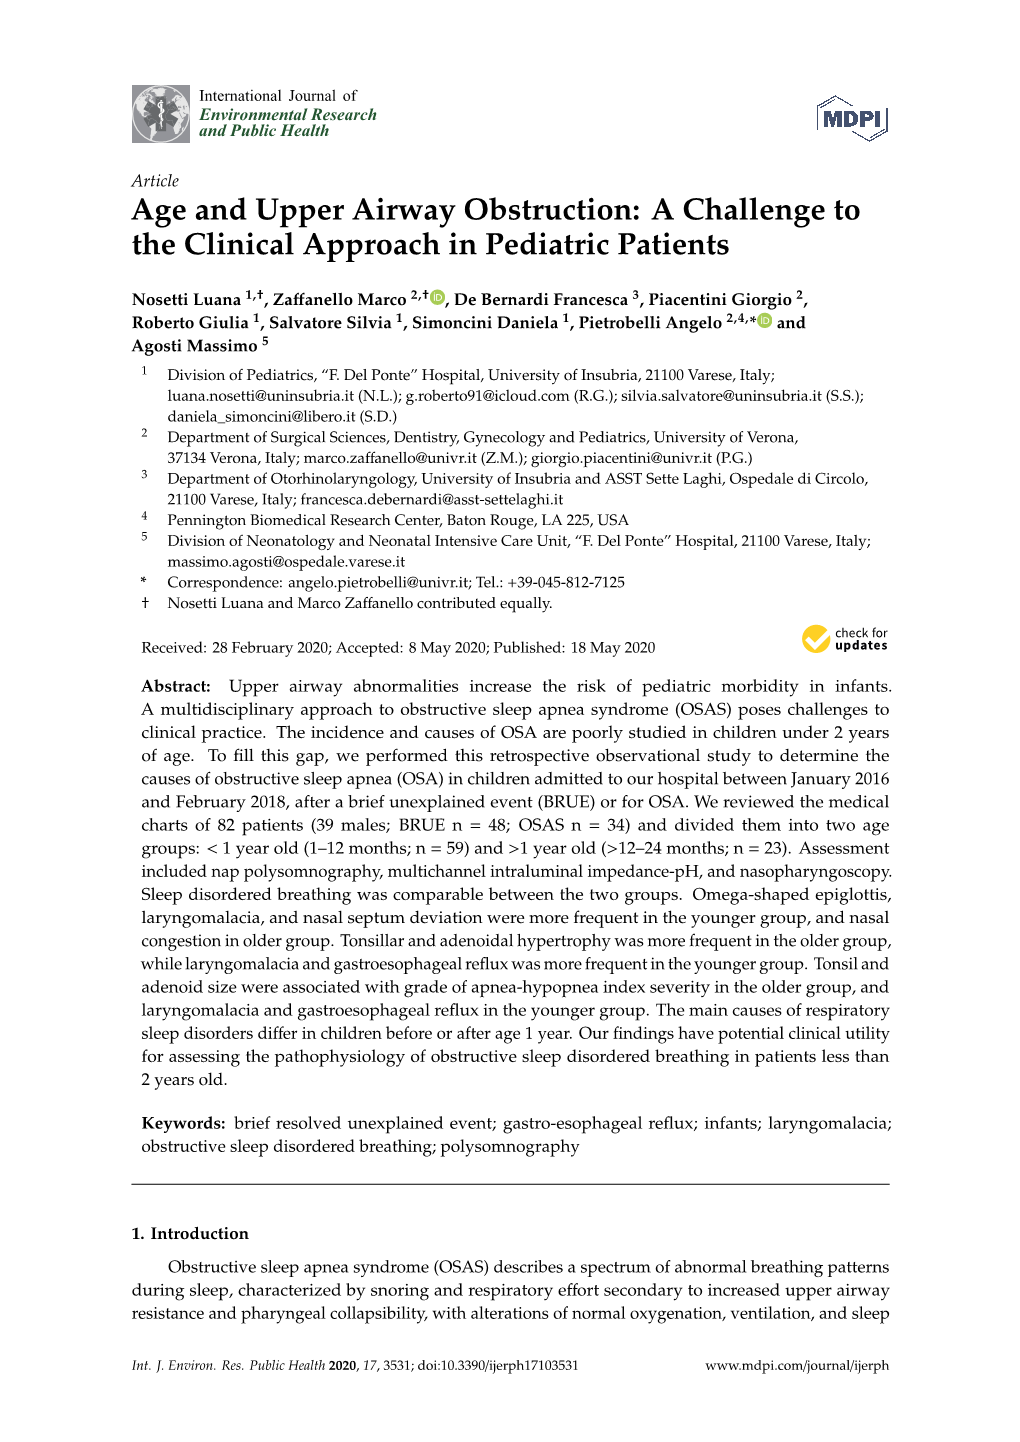 Age and Upper Airway Obstruction: a Challenge to the Clinical Approach in Pediatric Patients